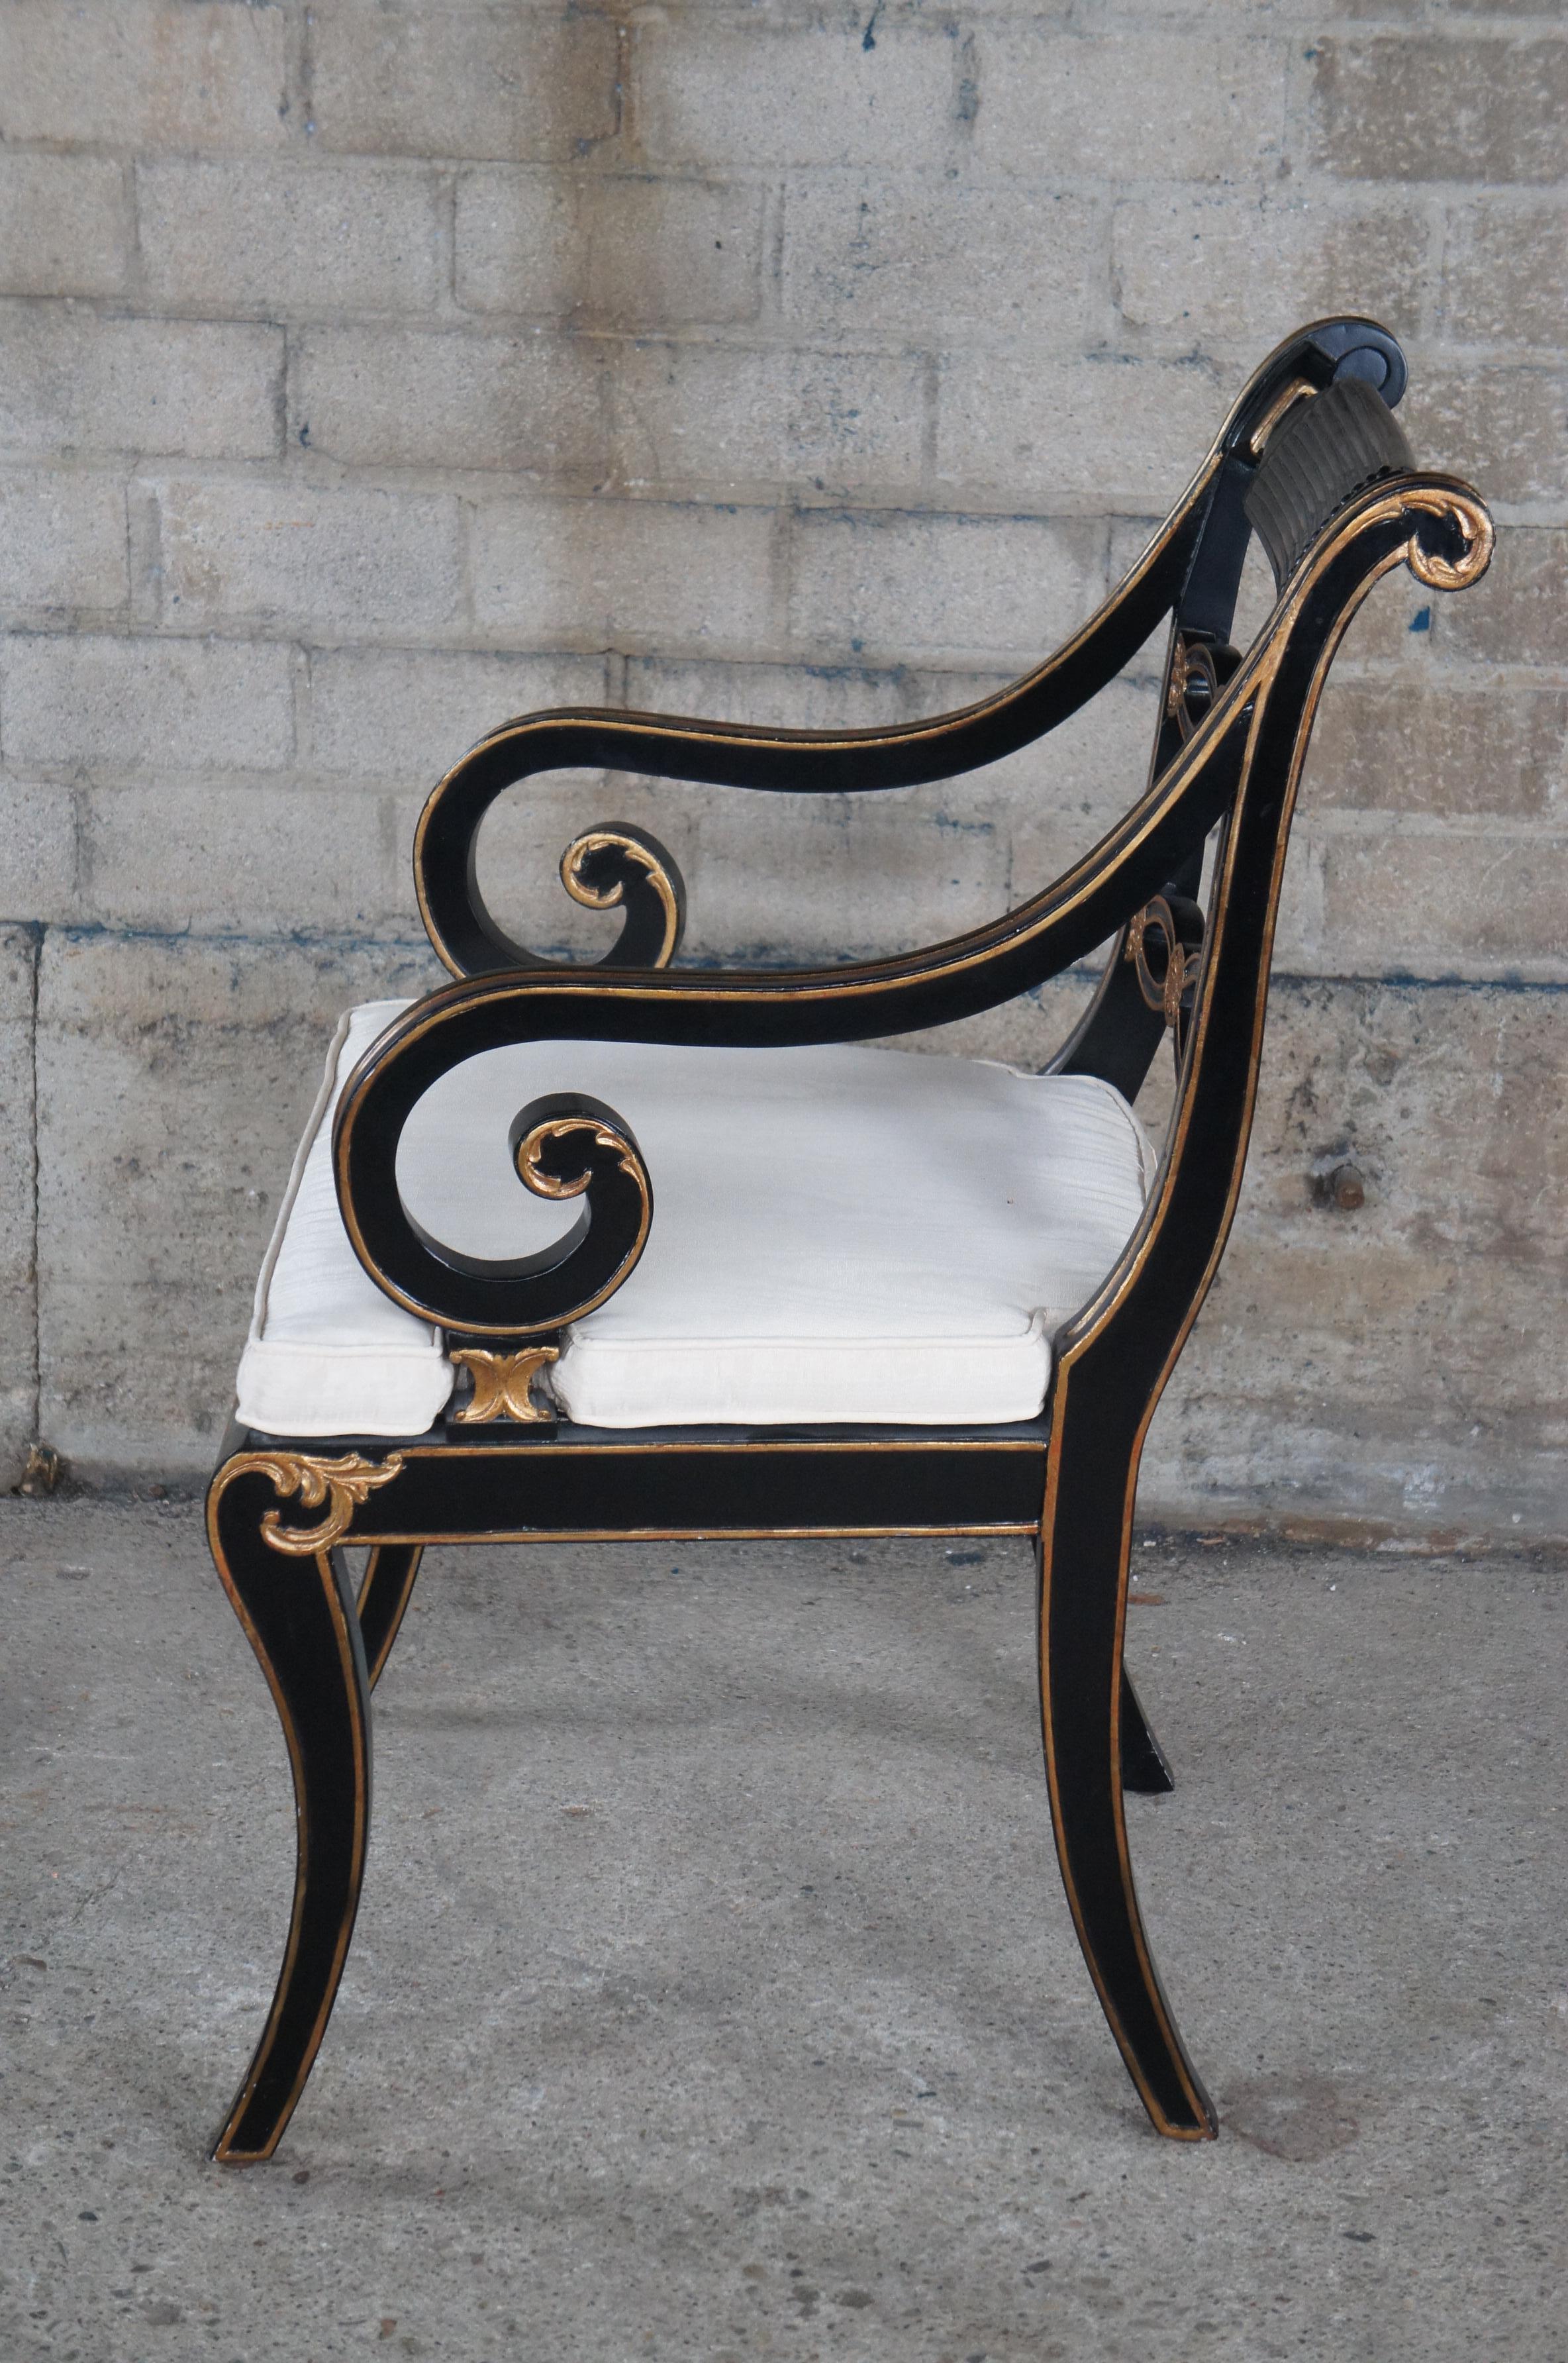 English Regency Caned Riddle Back Ebonized Black & Gold Scrolled Arm Chair  In Good Condition For Sale In Dayton, OH